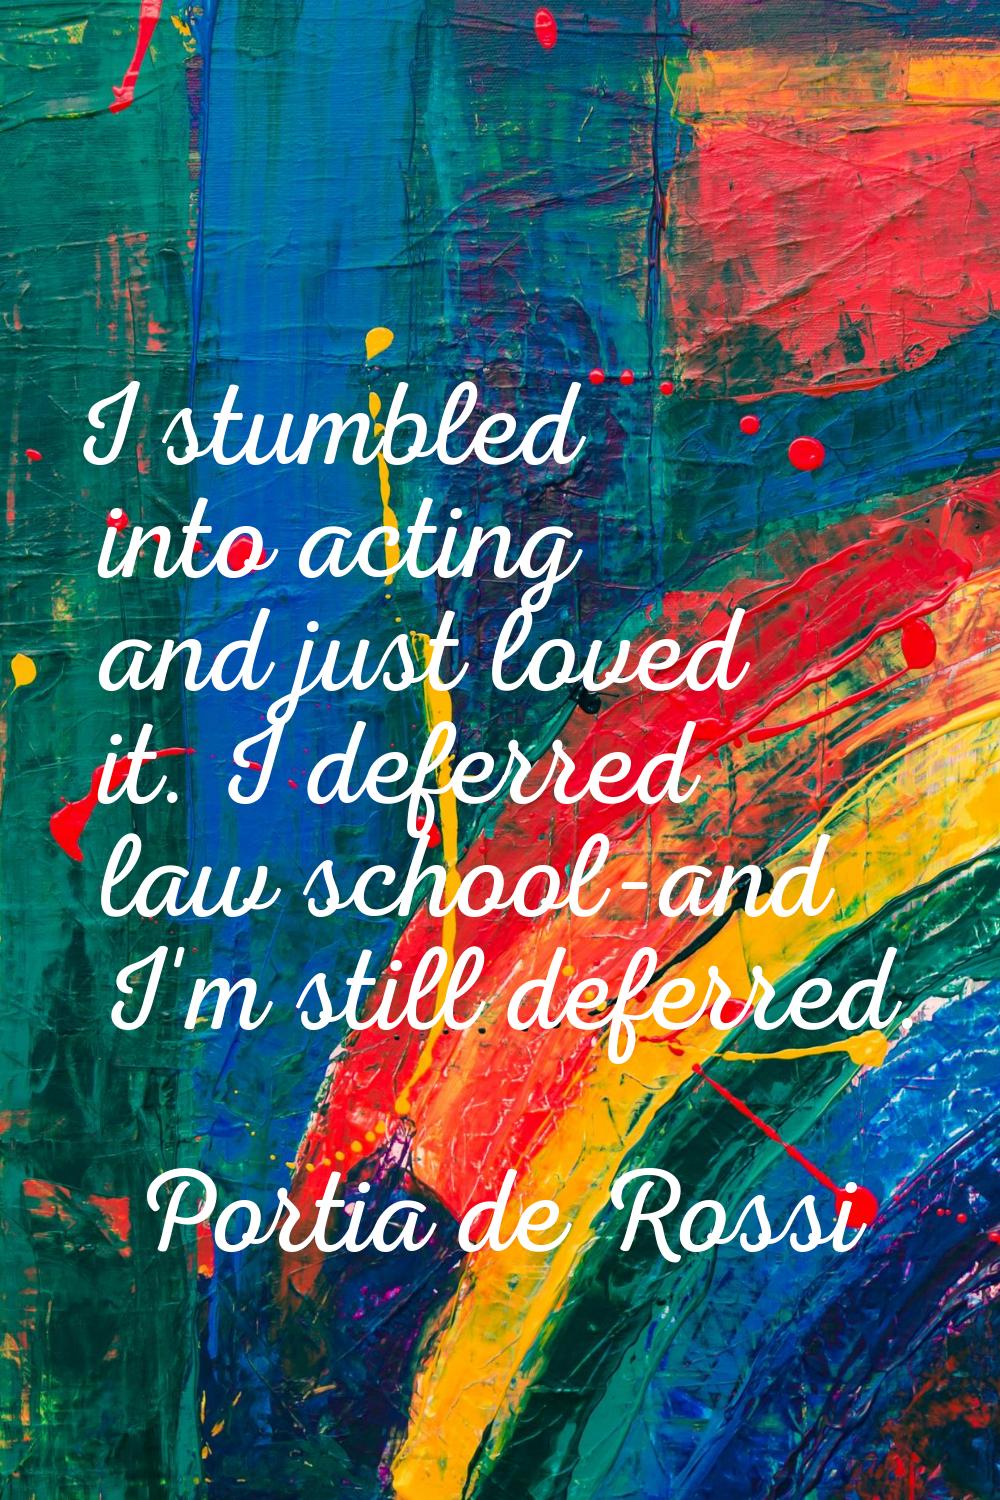 I stumbled into acting and just loved it. I deferred law school-and I'm still deferred.